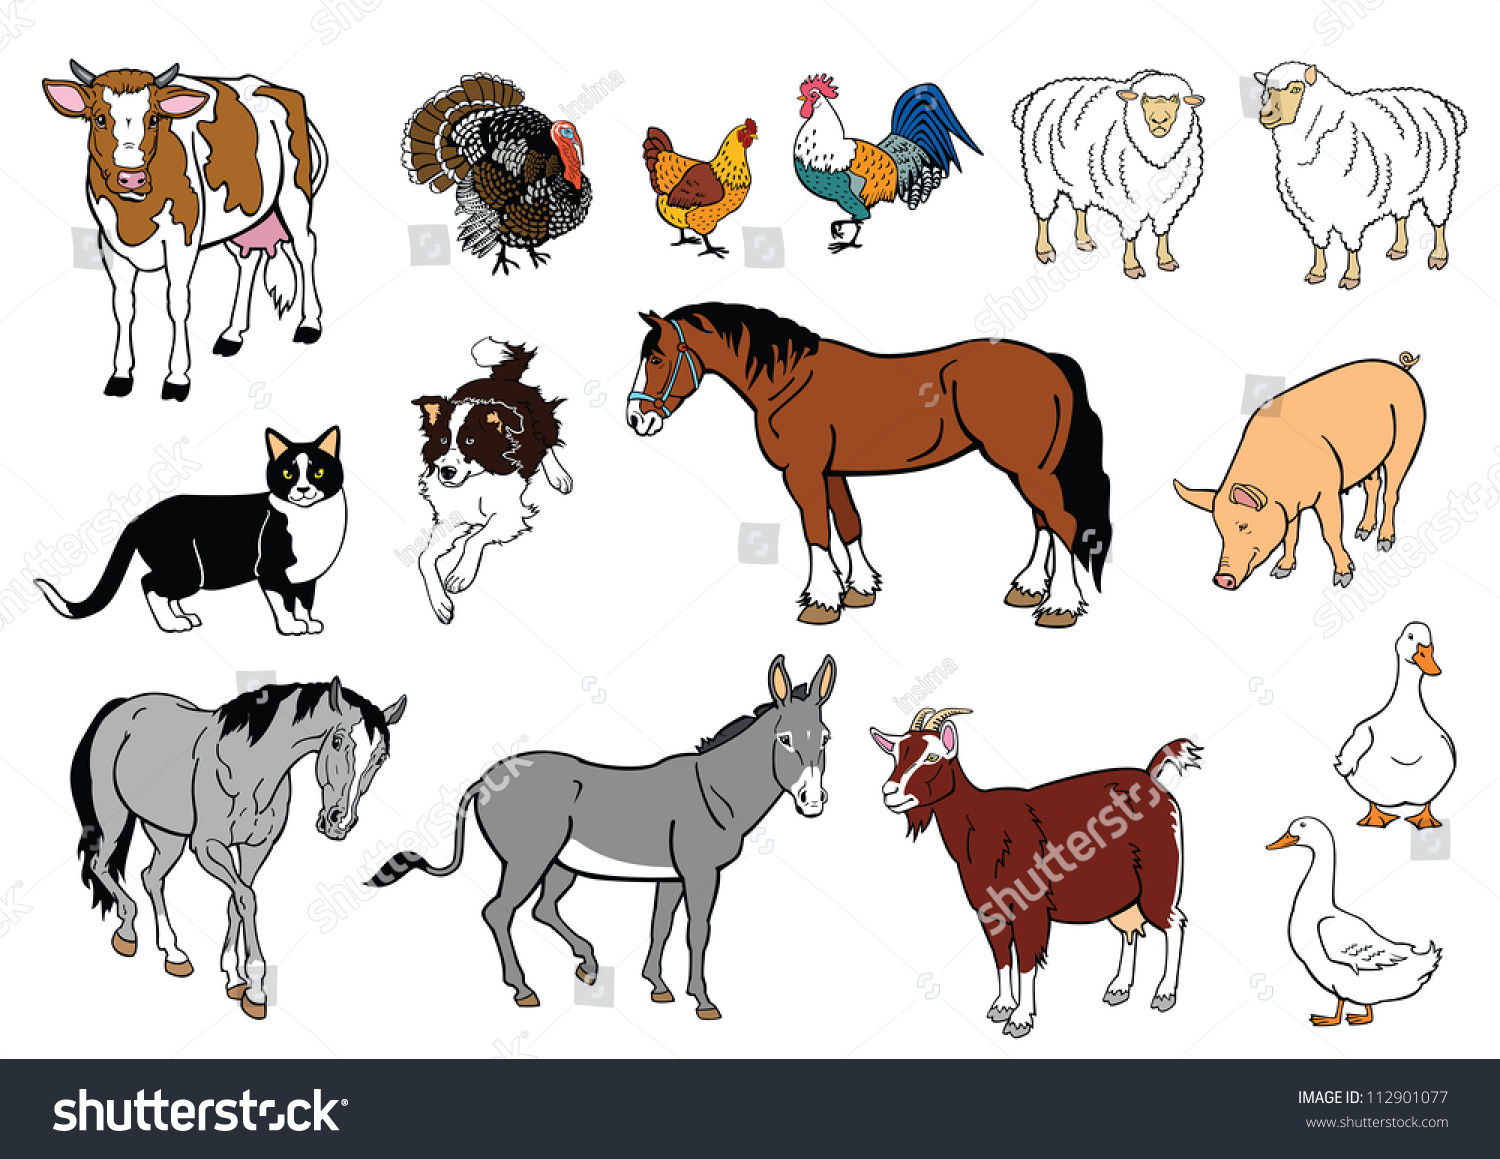 clipart images of domestic animals - photo #47